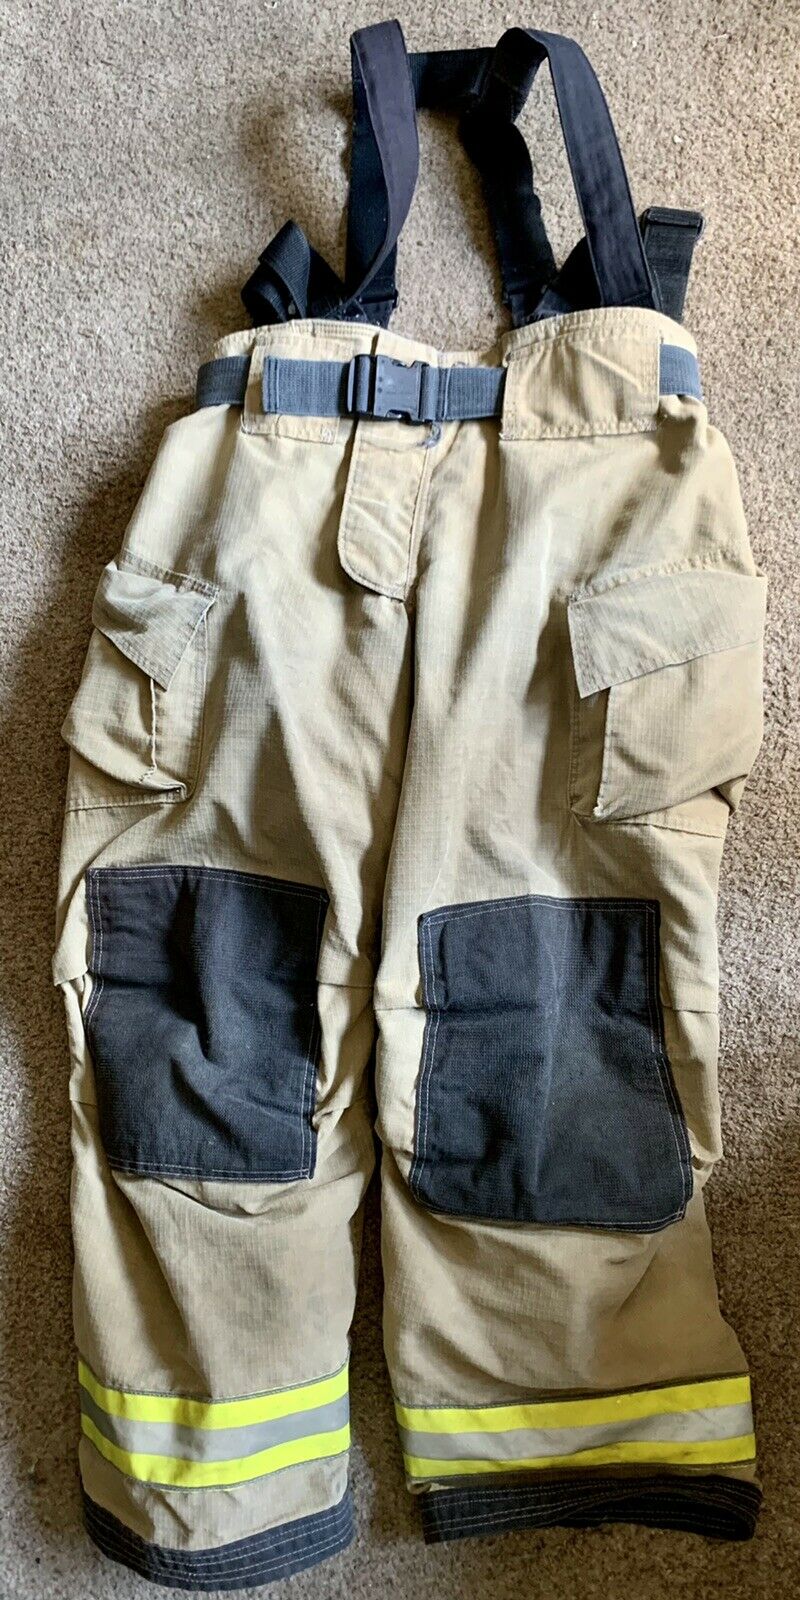 Cairns Reaxtion Turnout Bunker Pants 42 X 32 Used - Great Condition